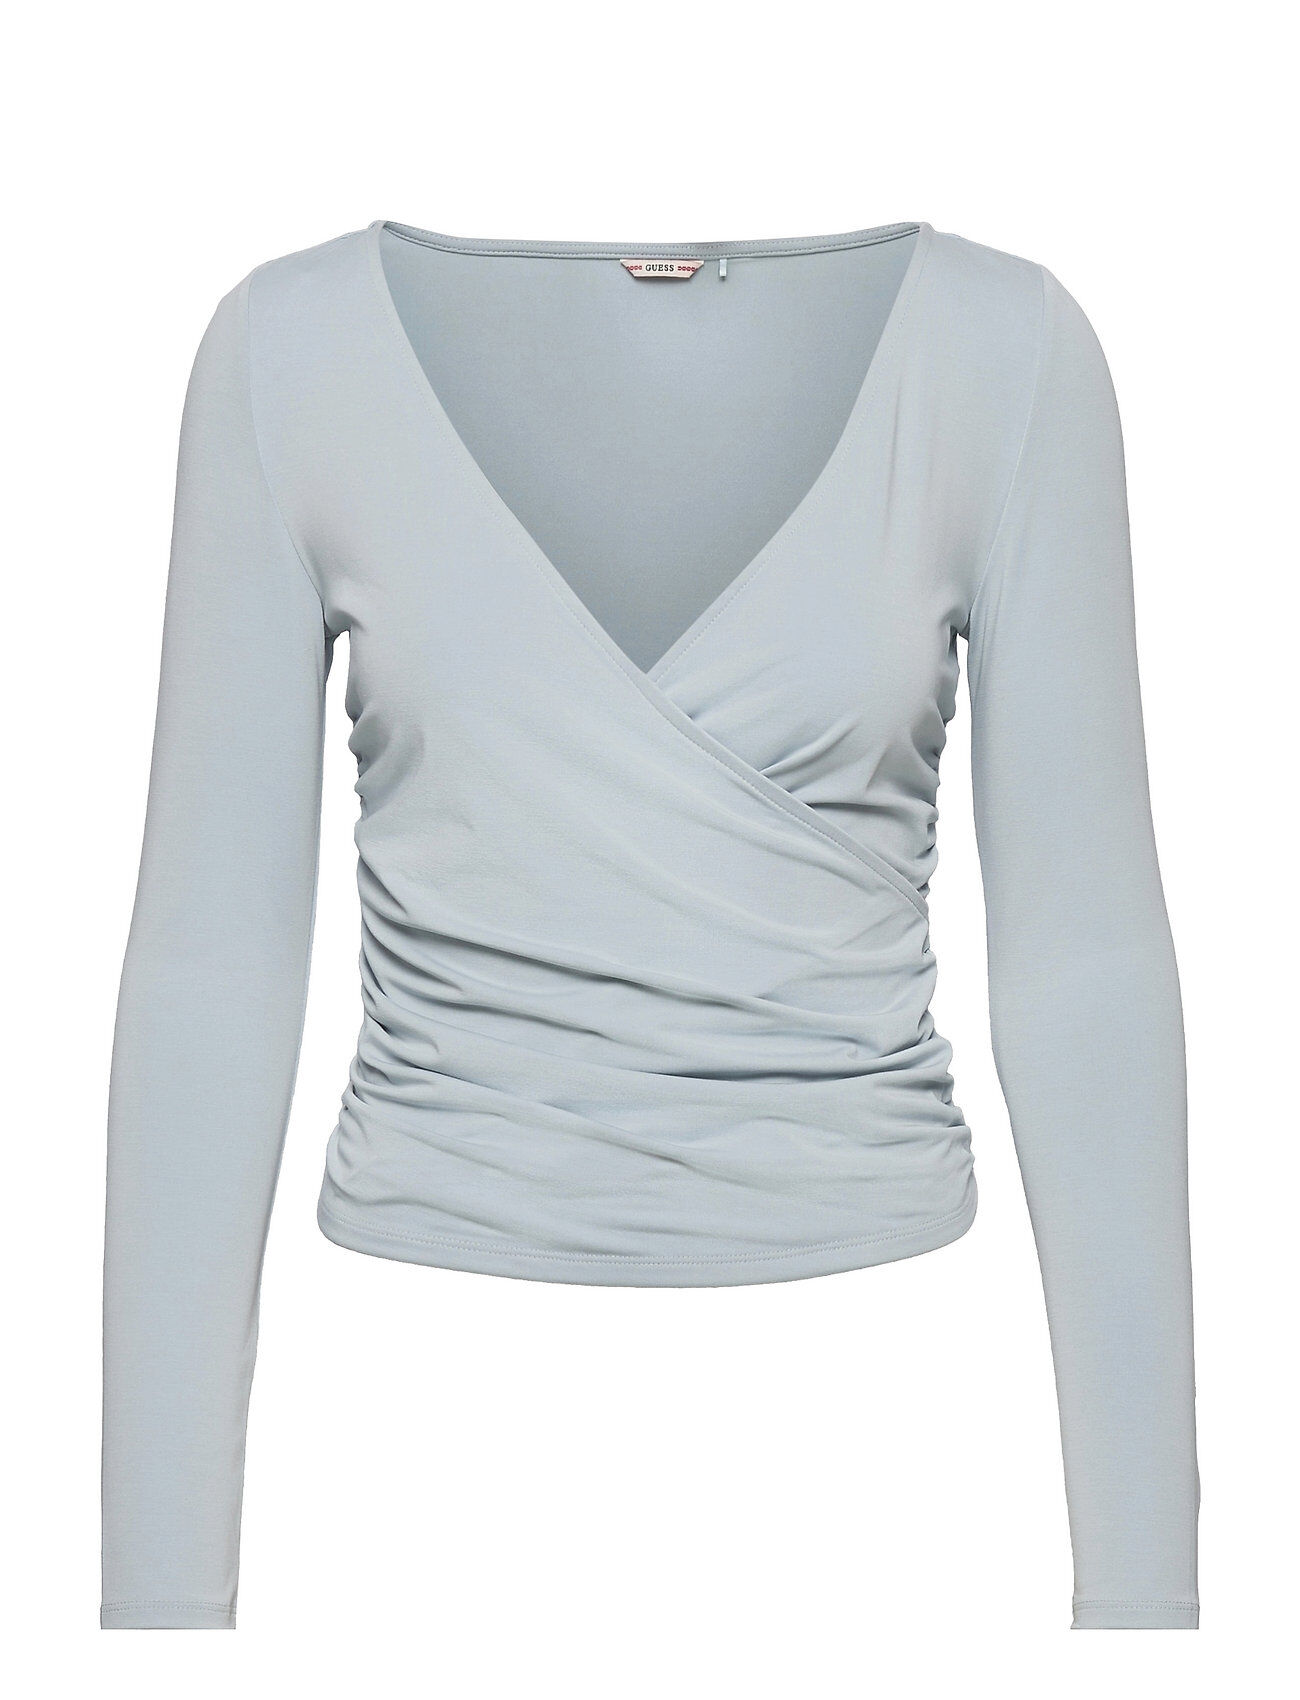 GUESS Jeans Ls Crossover Ruched Mena Top T-shirts & Tops Long-sleeved Blå GUESS Jeans